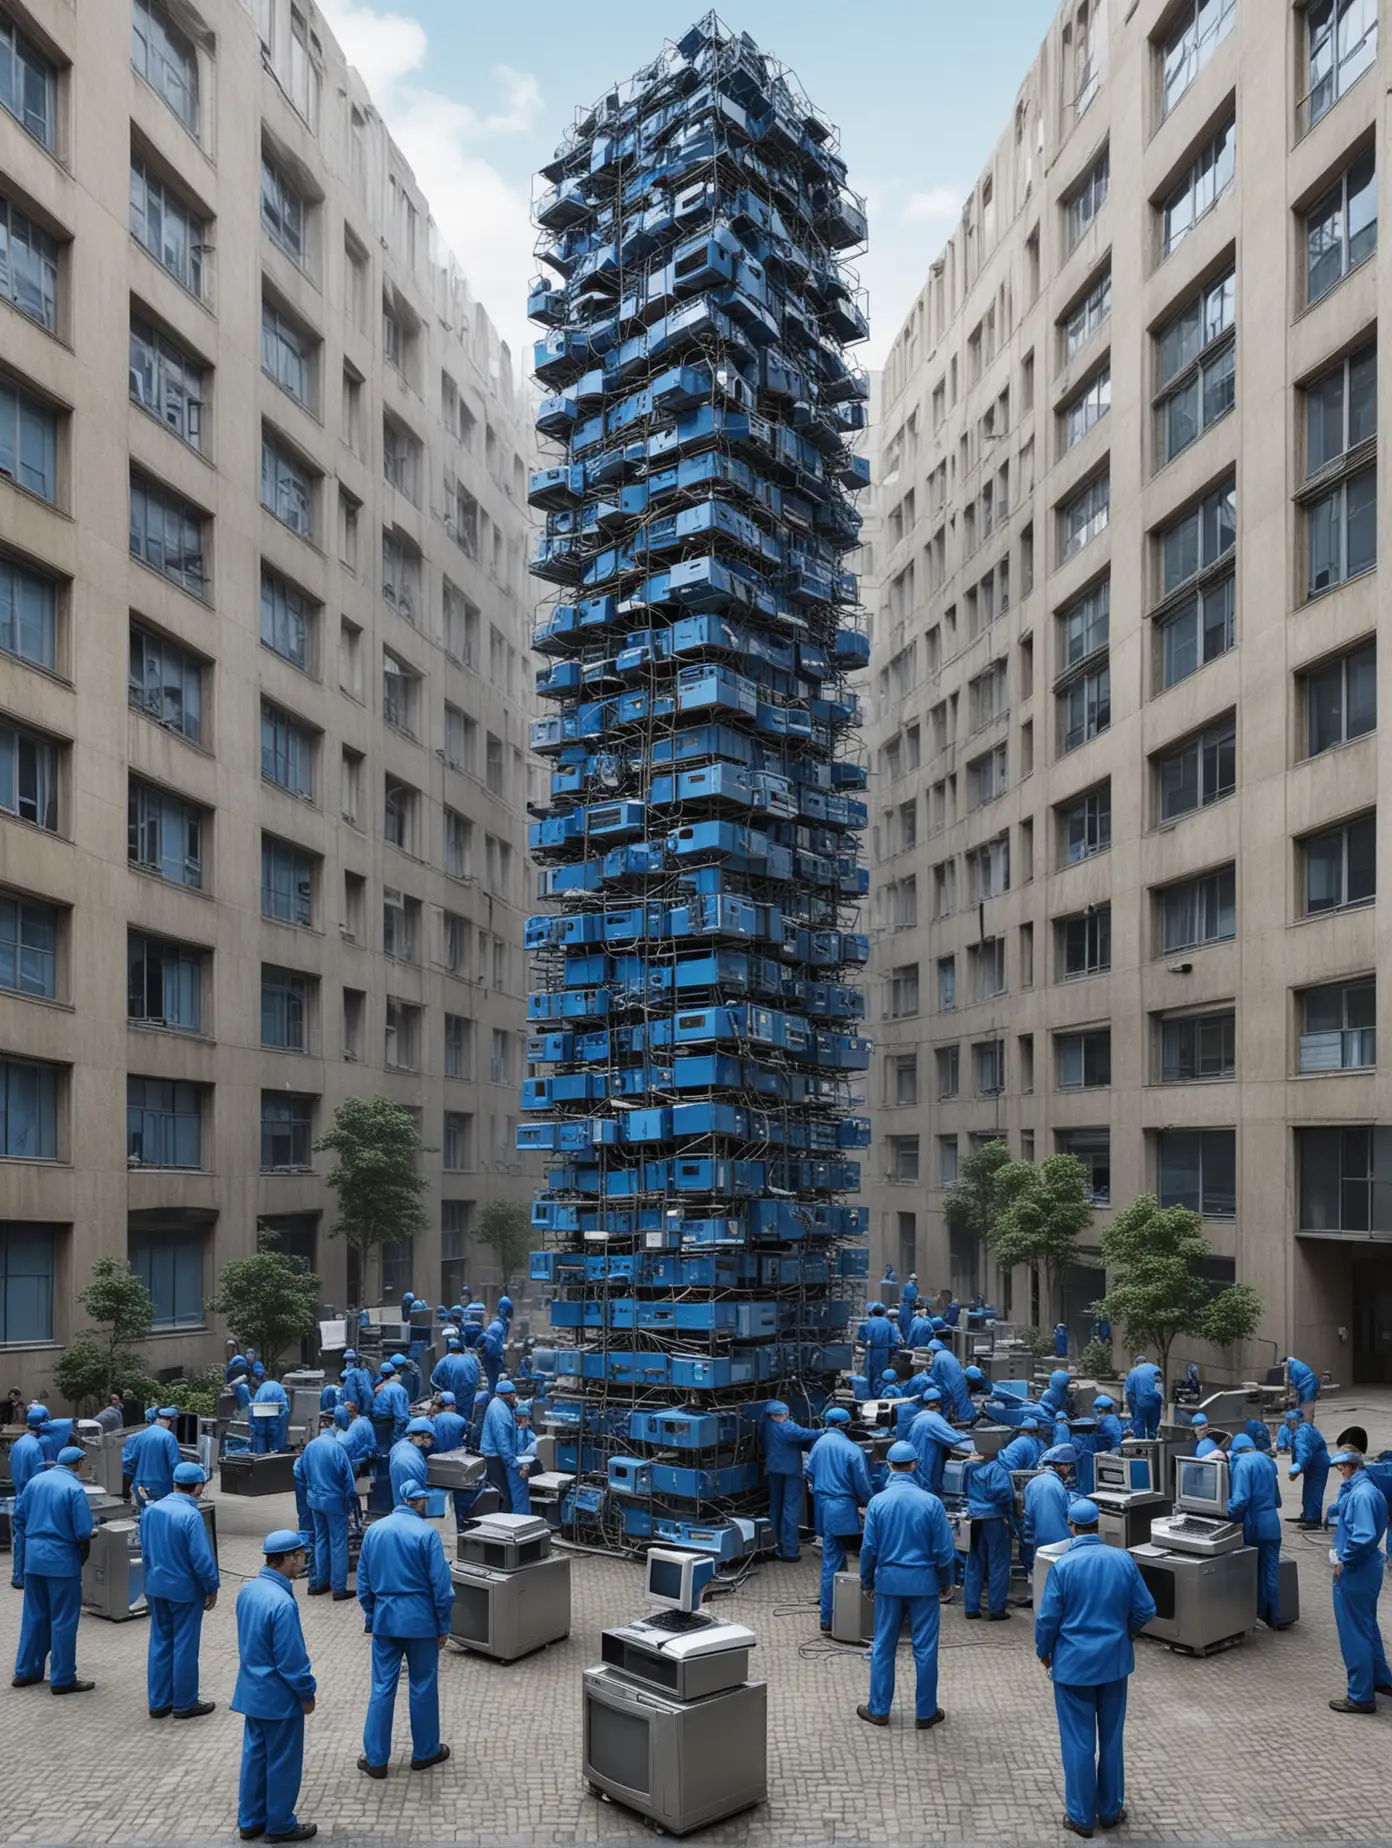 Surreal Business Tower Workers Stack Old Computers in Courtyard of Insurance Company